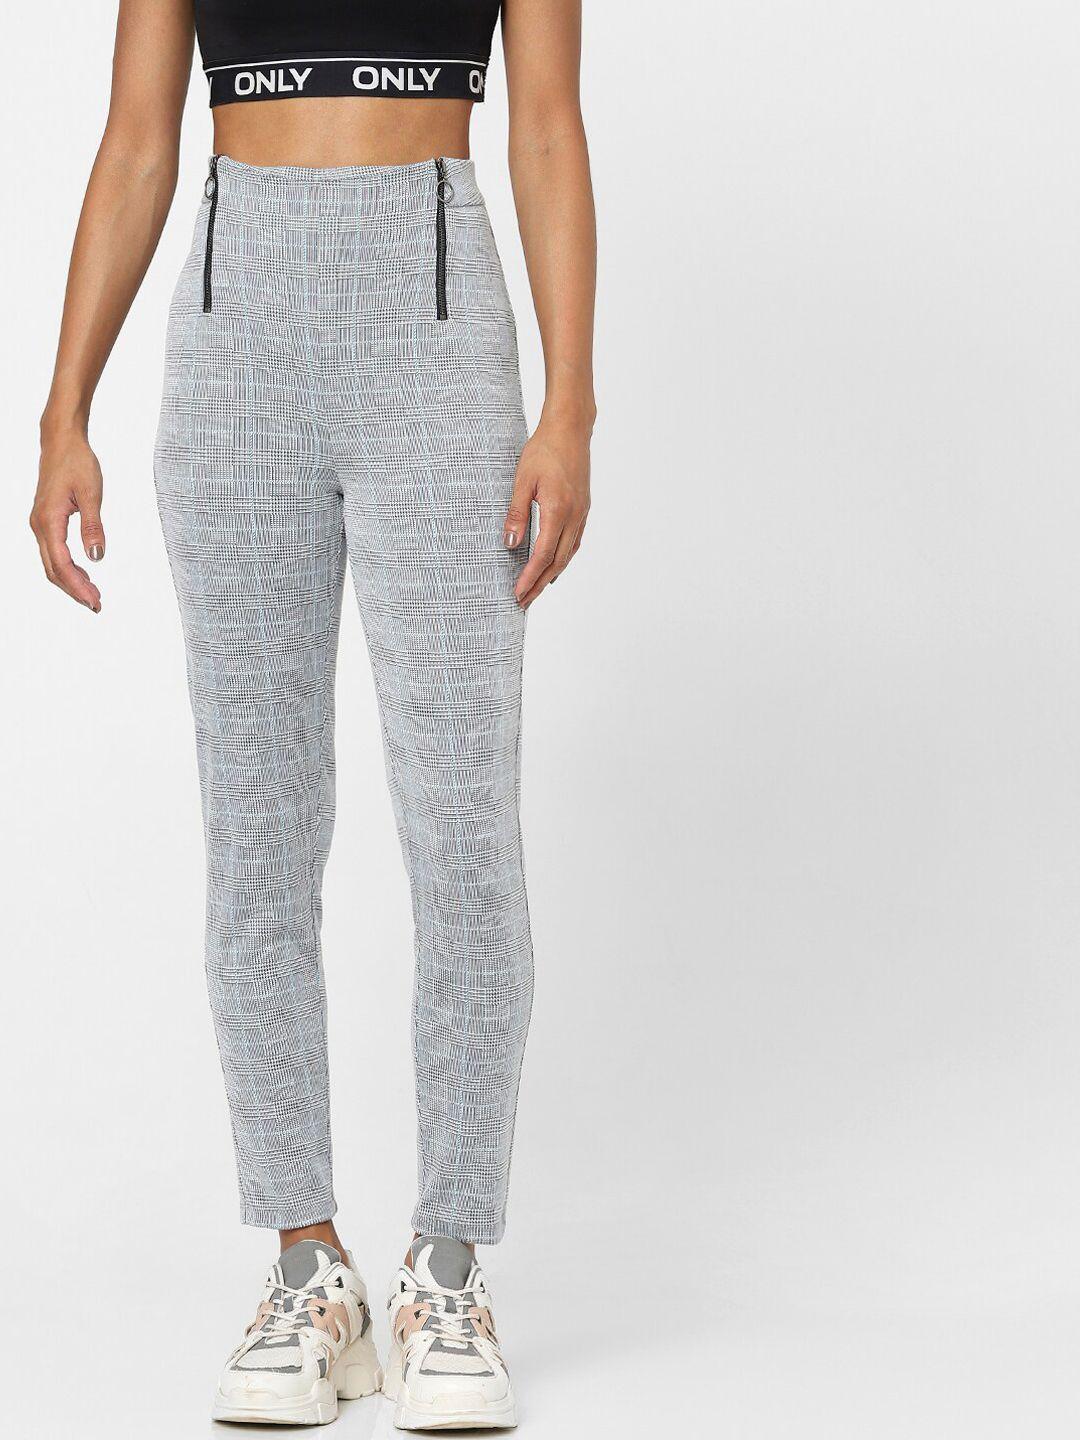 only-white-&-grey-checked-high-waist-skinny-fit-jeggings